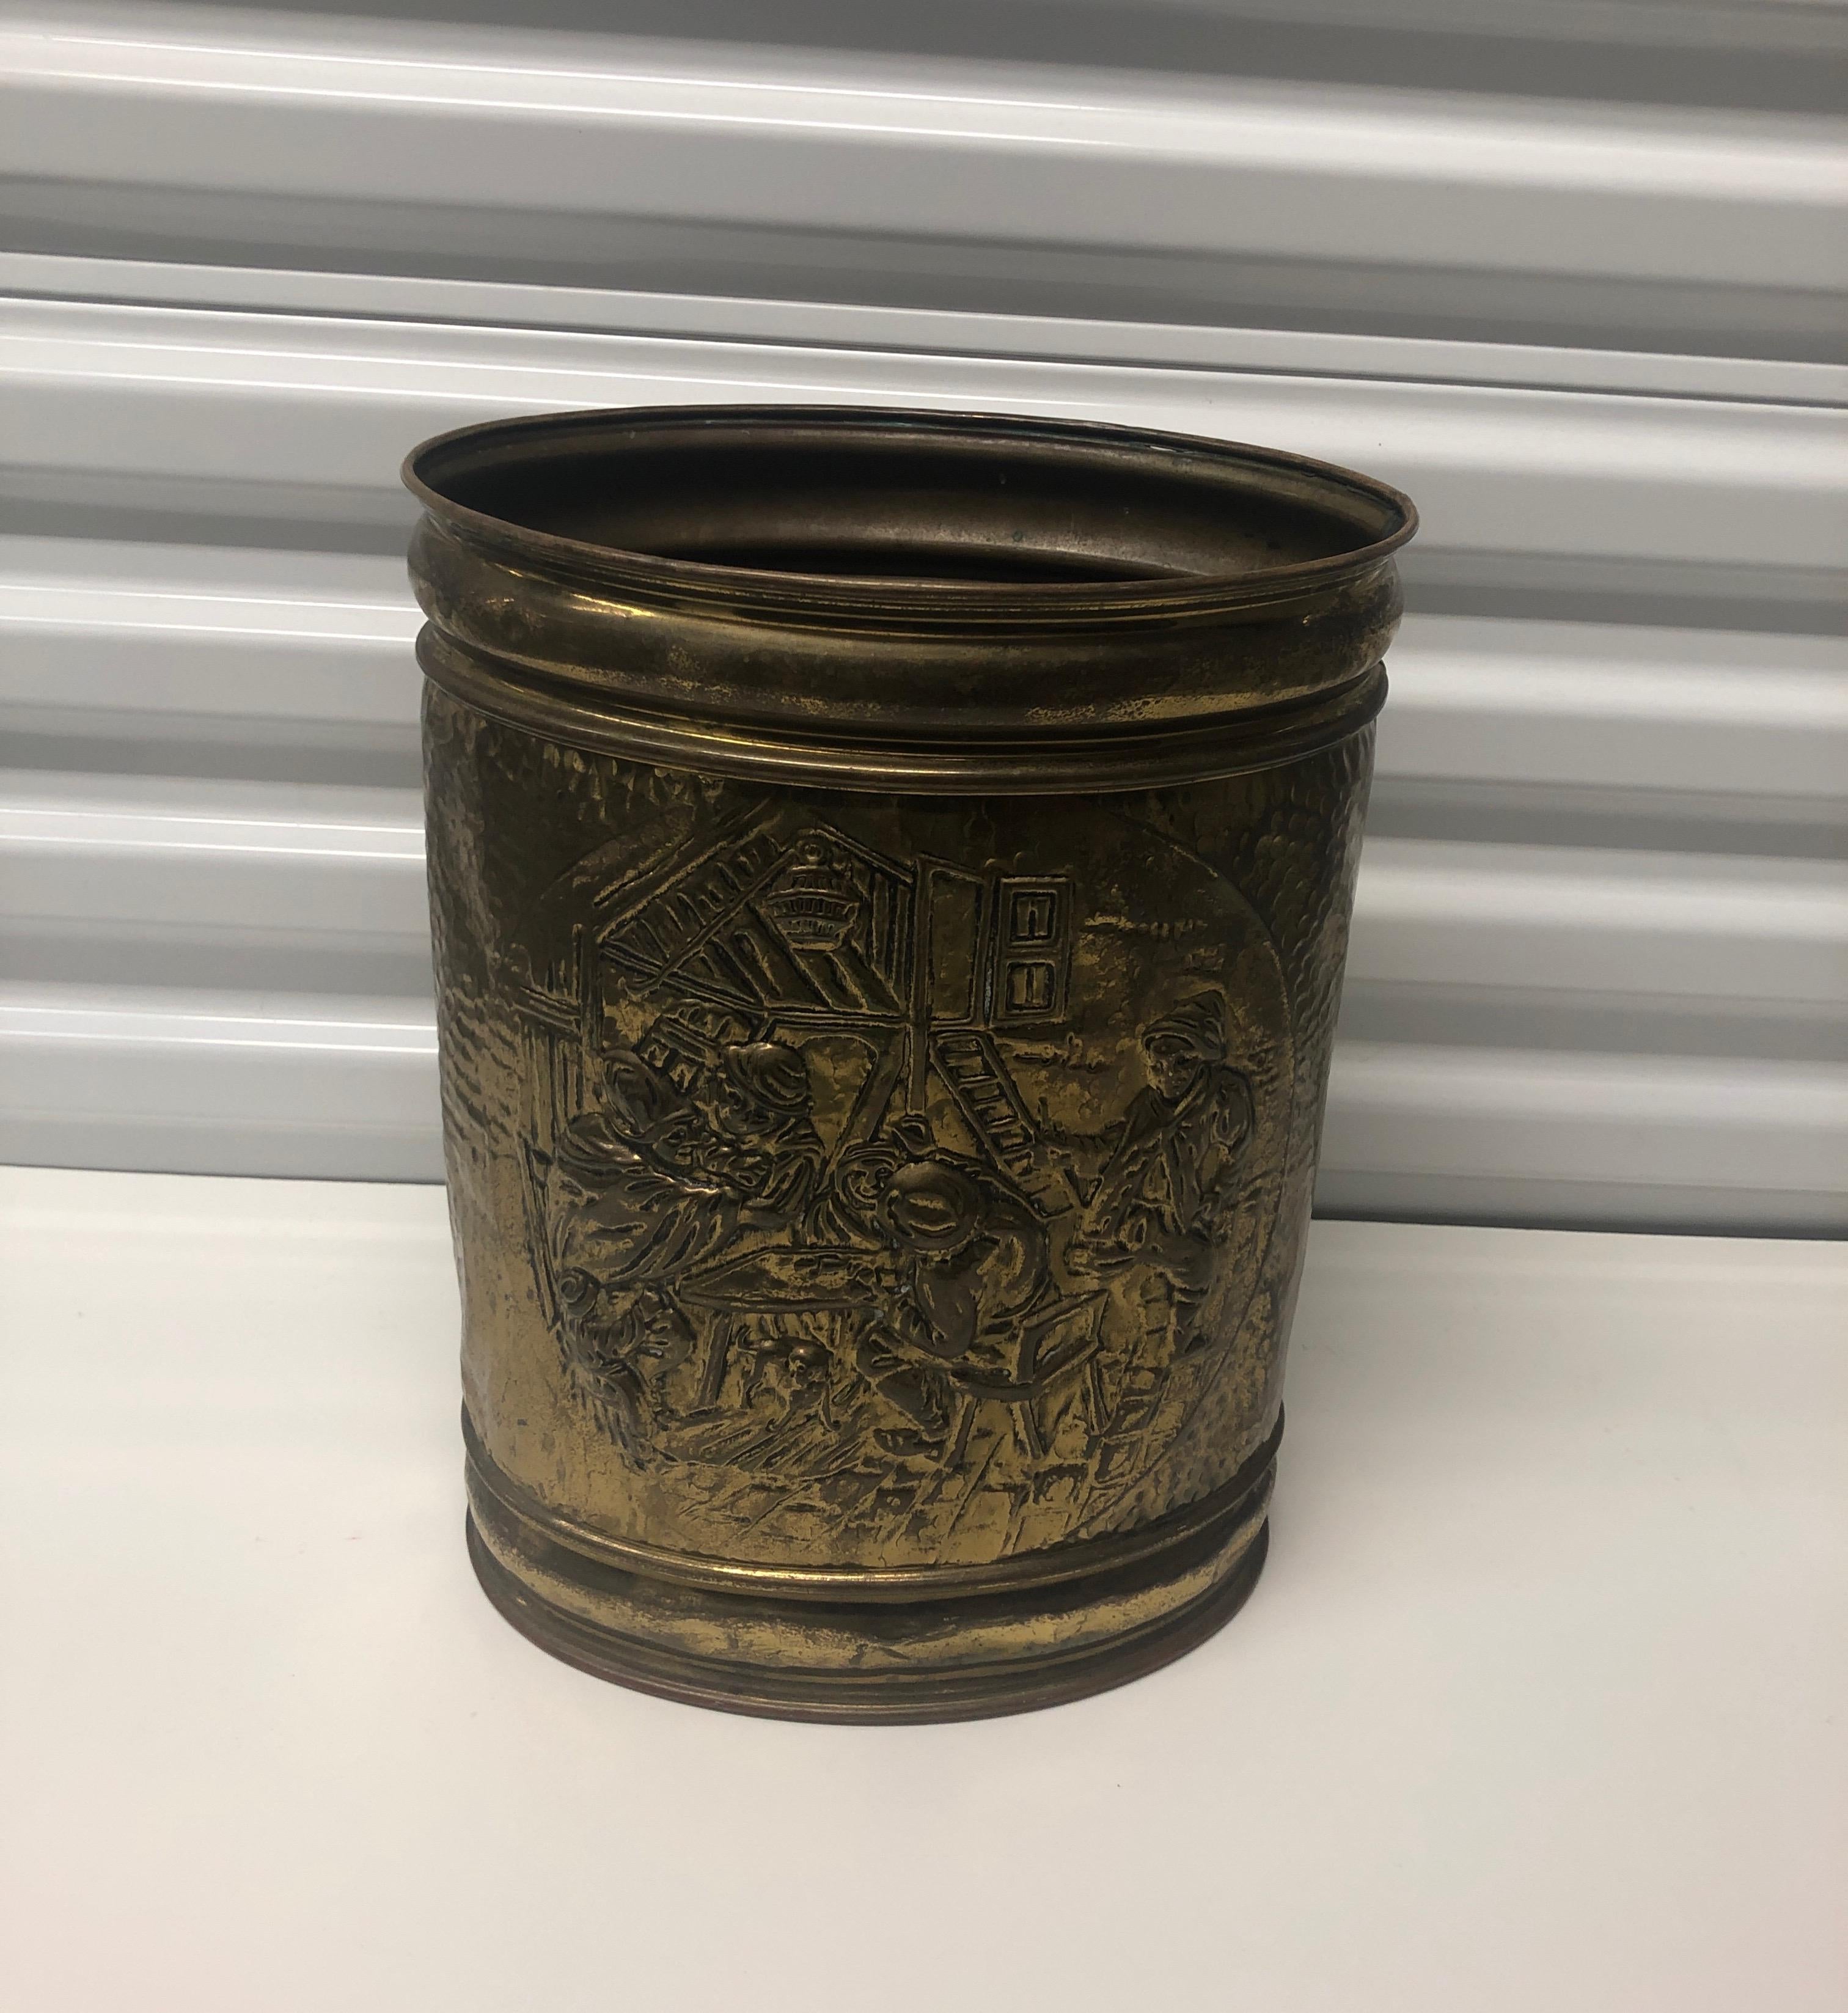 Vintage oval polished brass repousse wastebasket
with campaign scene, oval shape.
Size: 13.5” H x 7” D x 10” W.